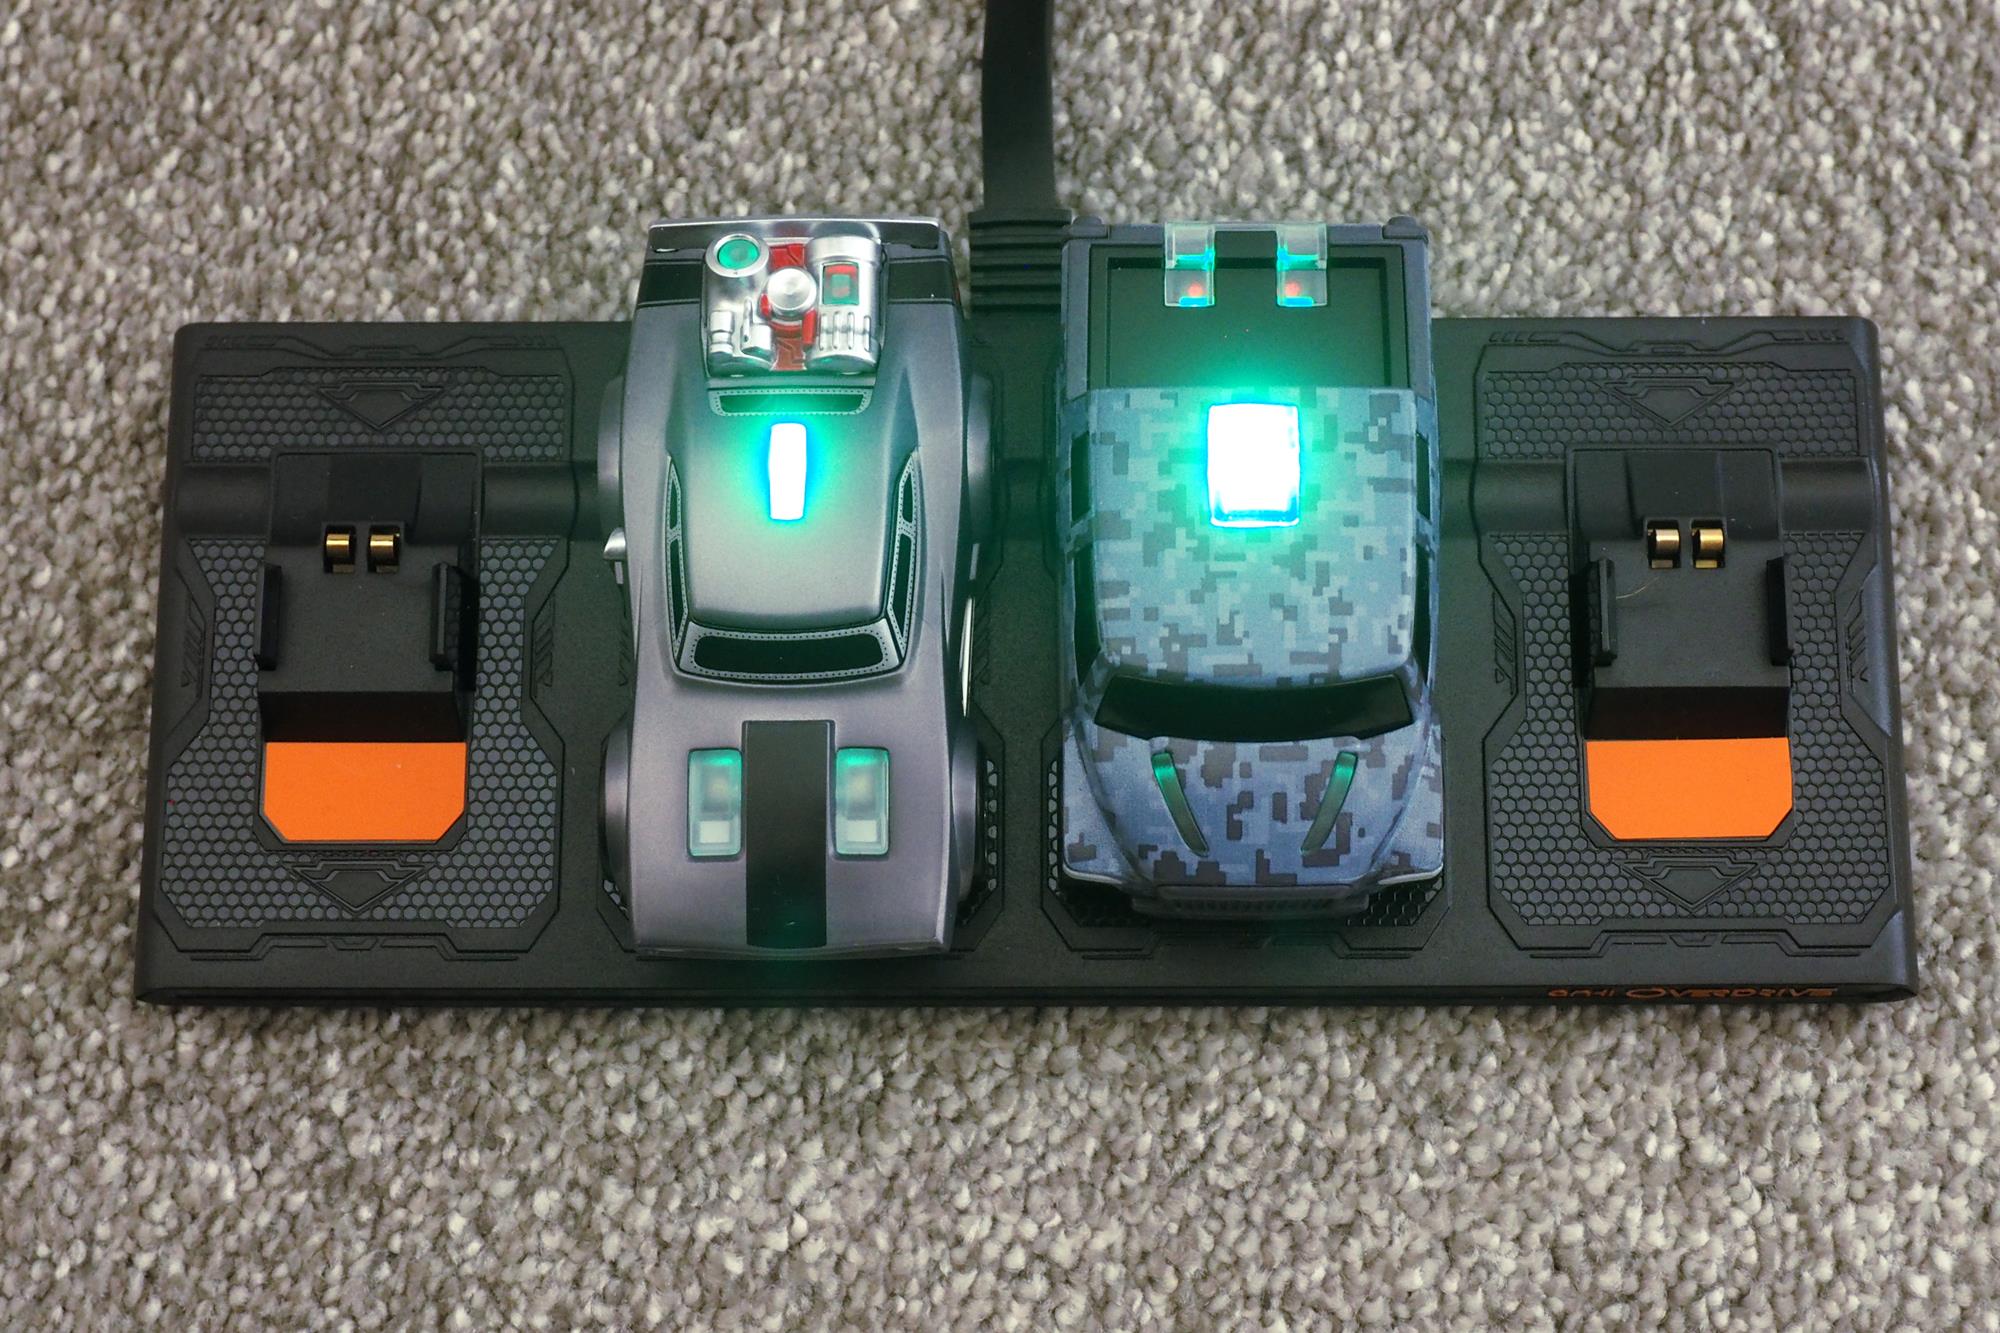 Anki Overdrive cars on charger with illuminated indicators.